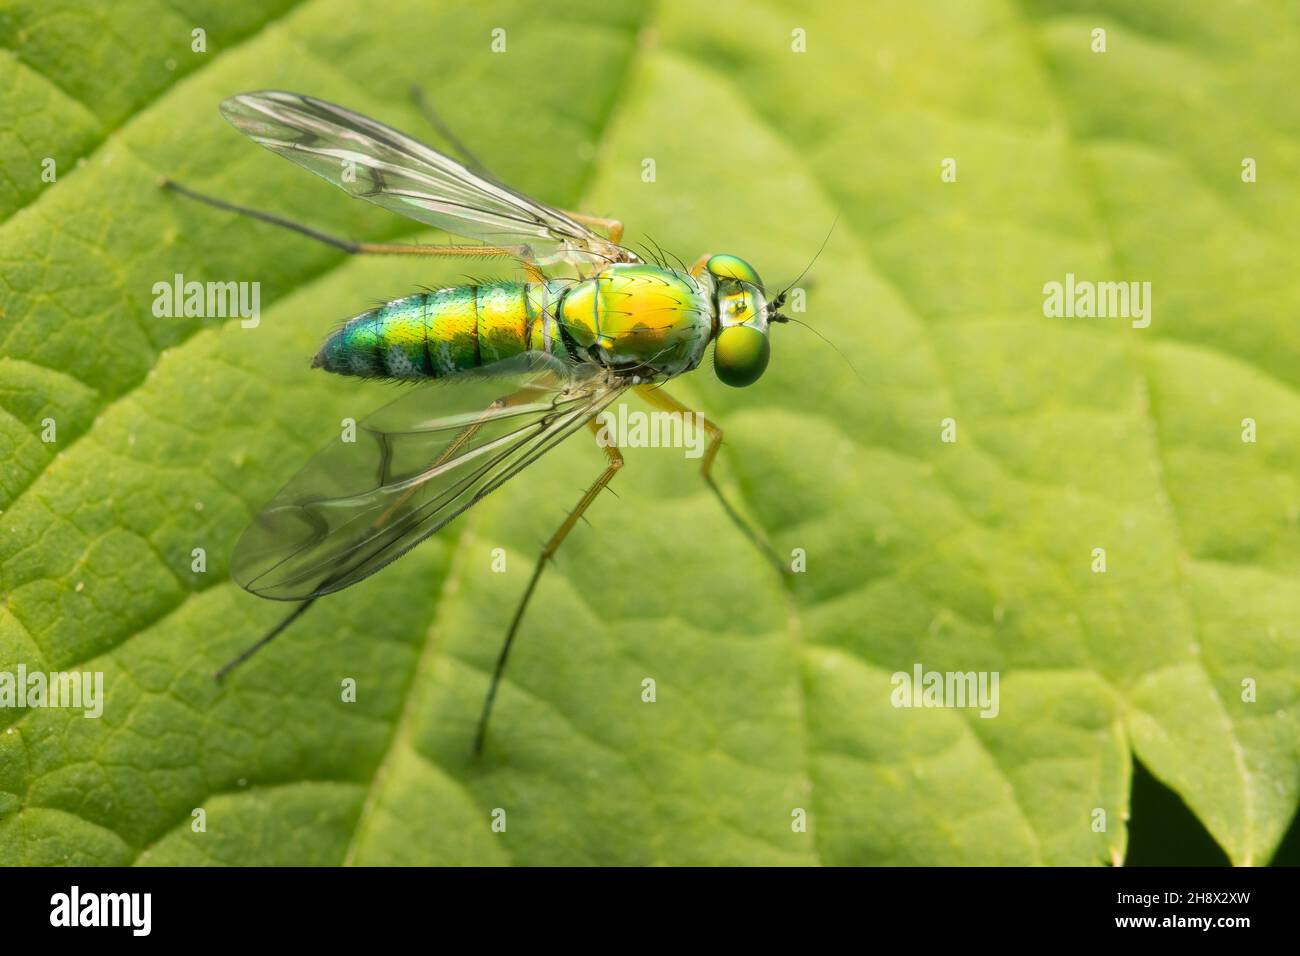 Top view on a Long Legged Fly with metalic green color and copy space Stock Photo